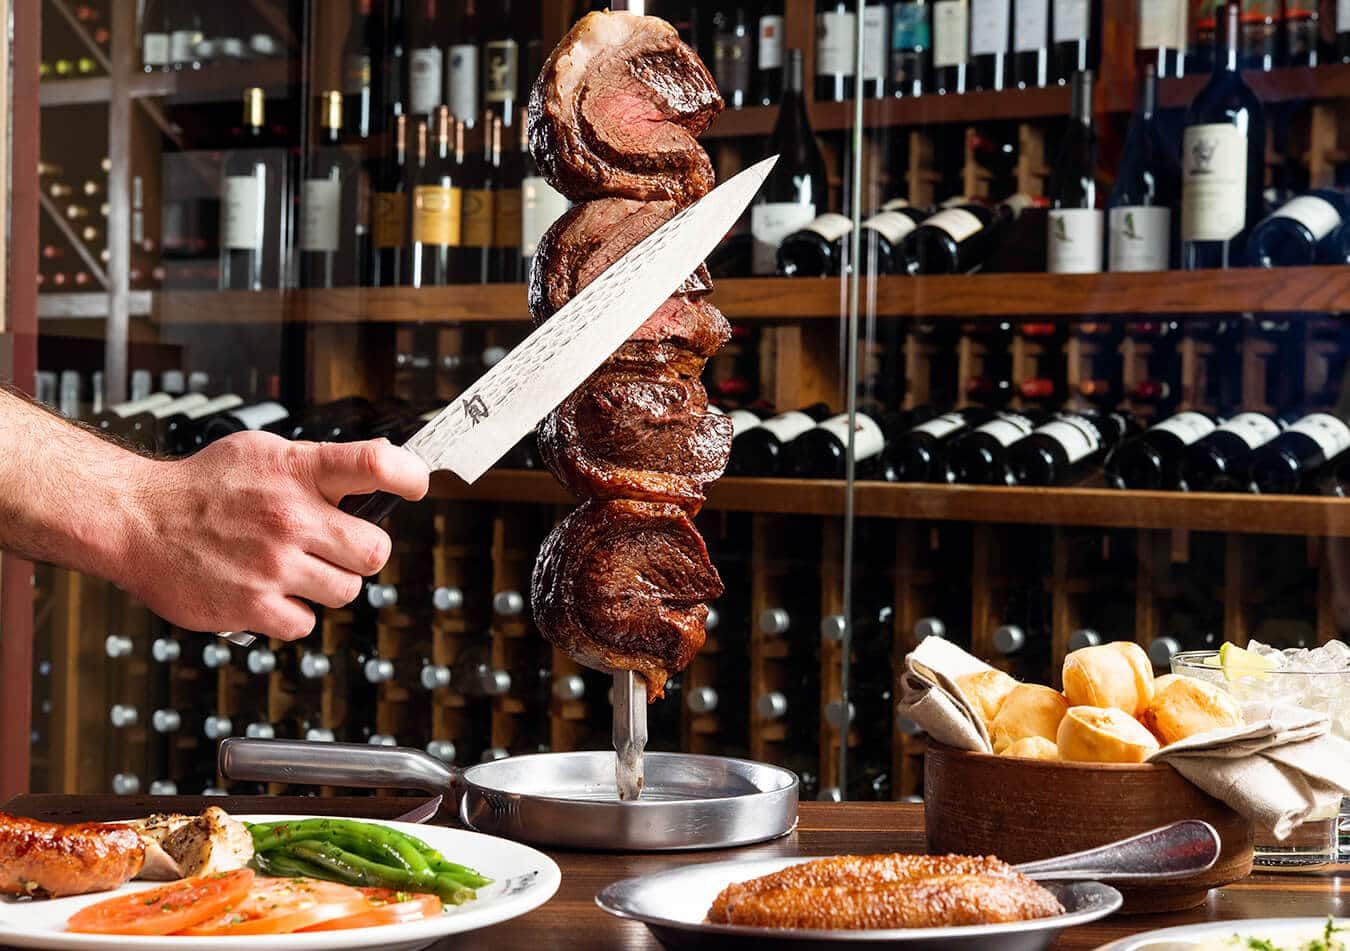 Some Menus to Find in Cafe Mineiro Brazilian Steakhouse